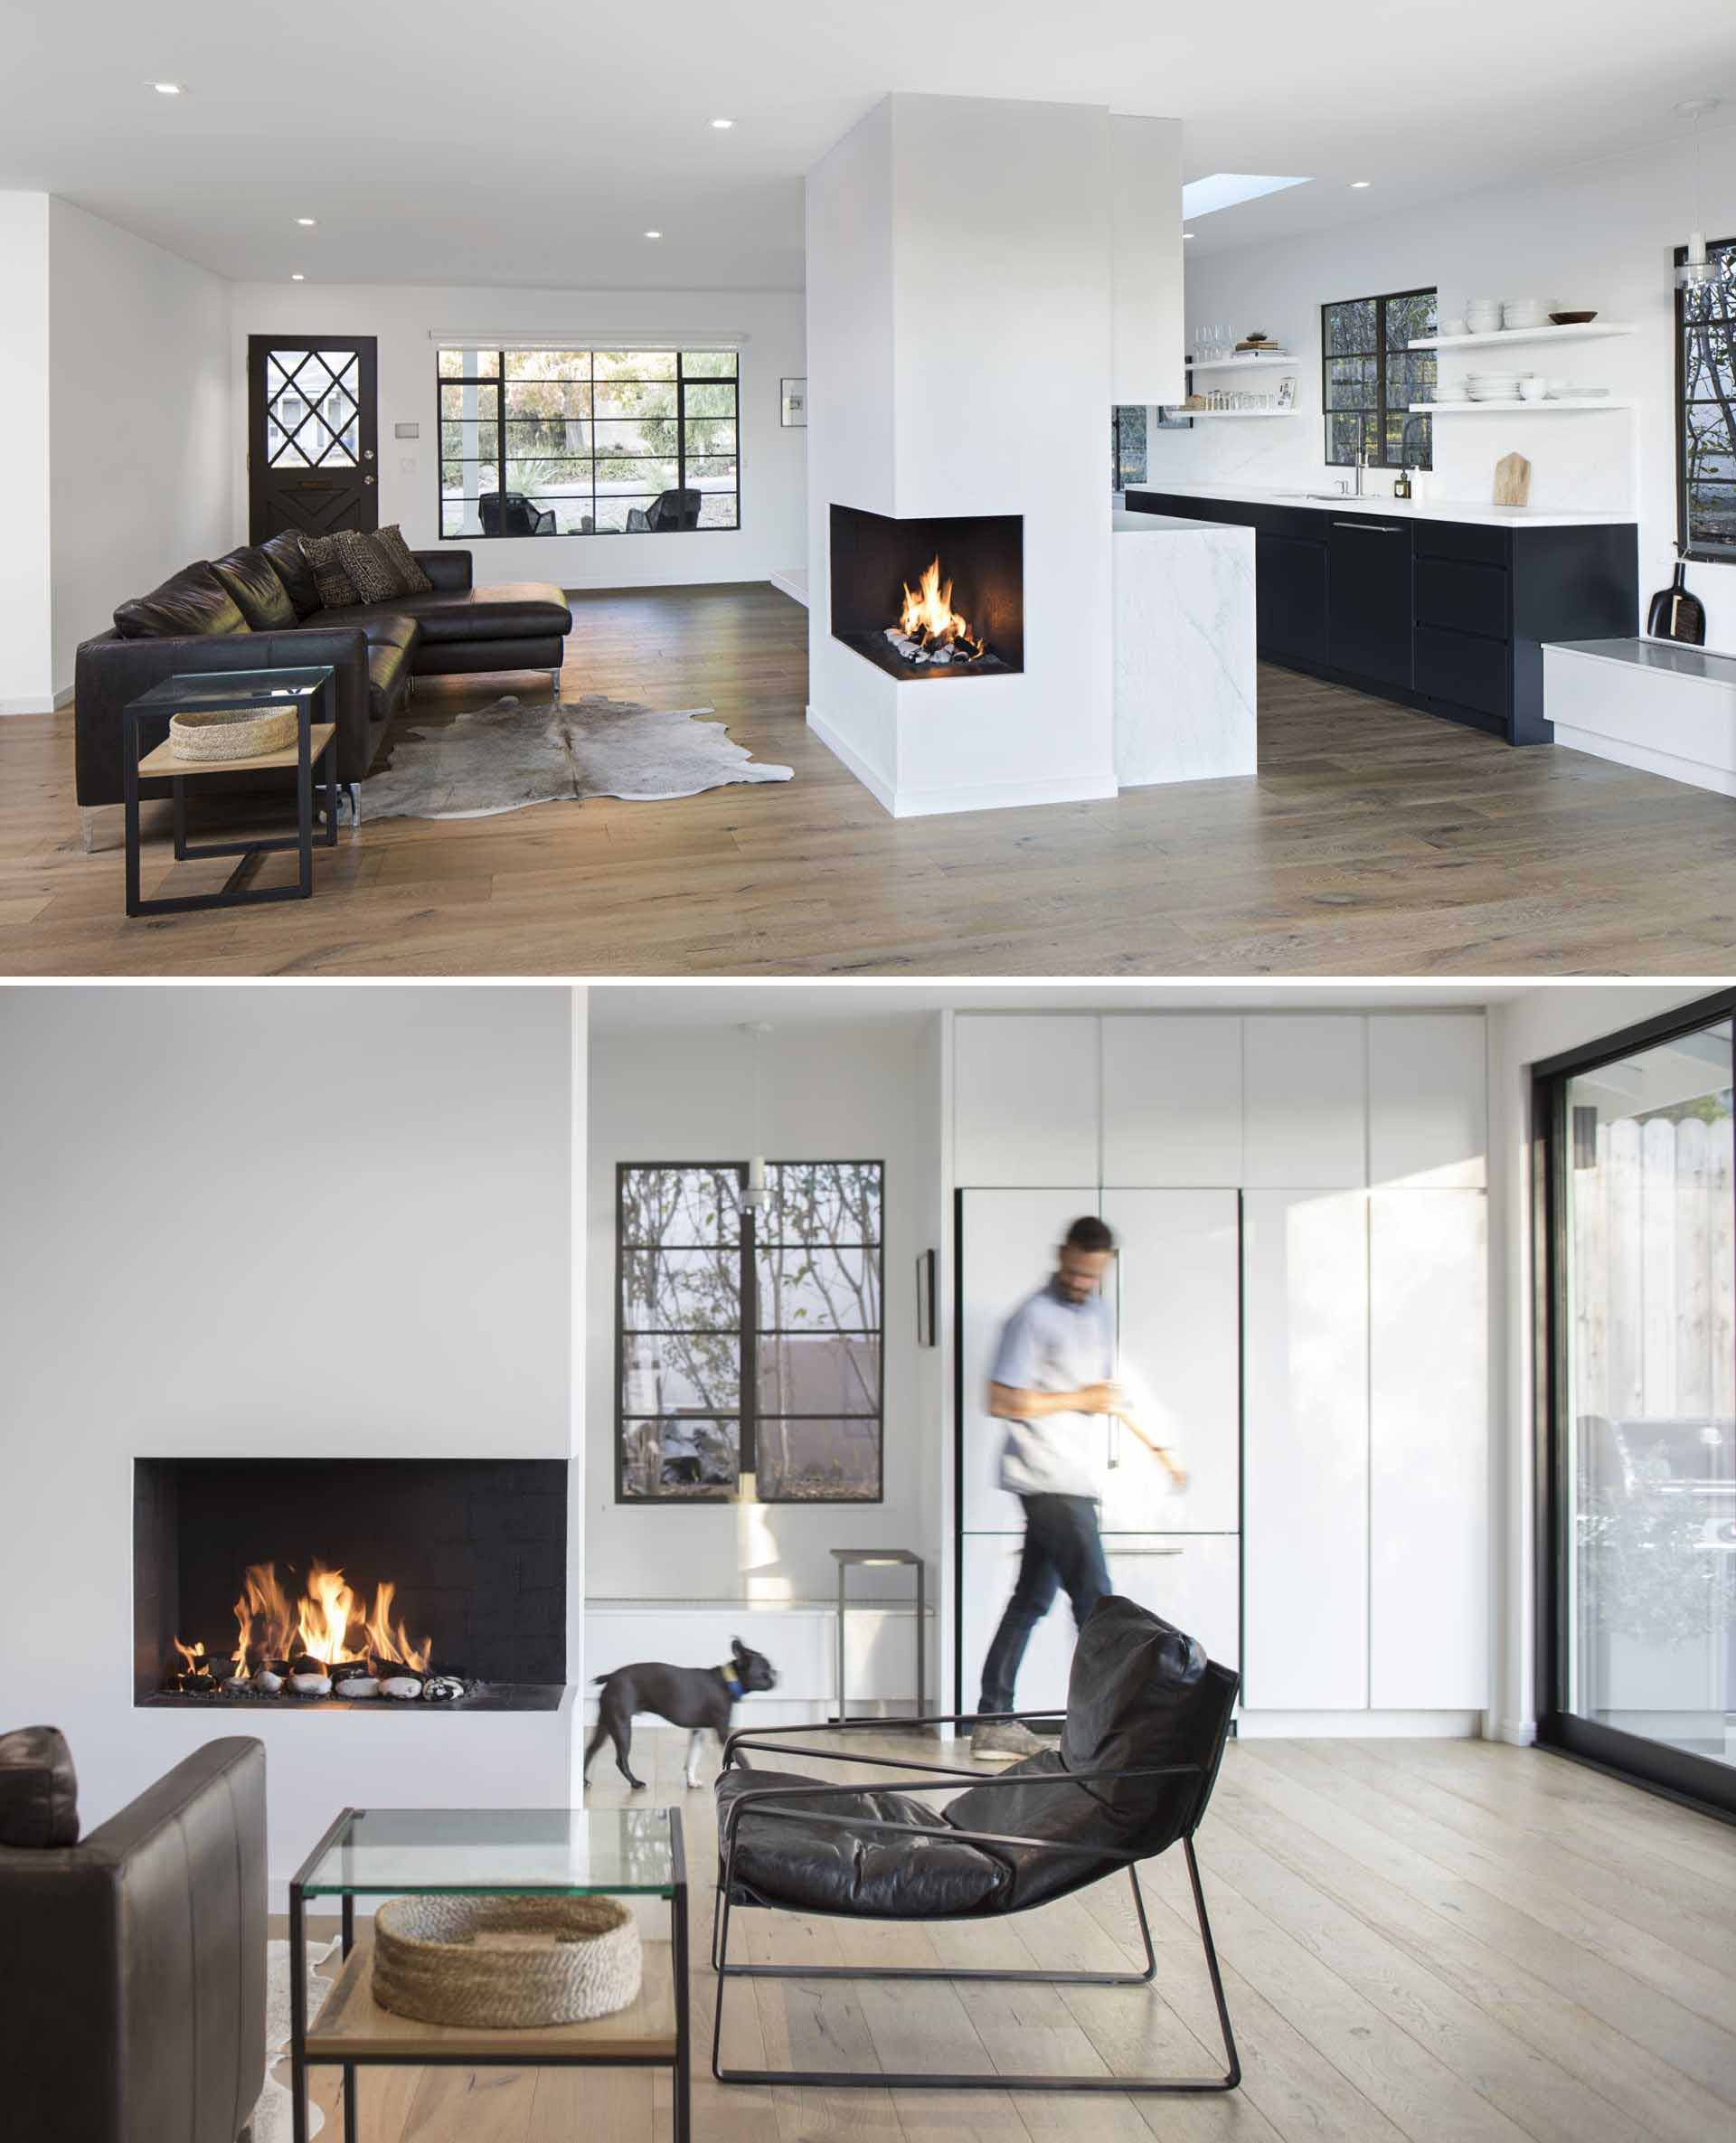 The interior of this renovated ranch home is inspired by Scandinavian design, with white finishes and cool woods used to create minimal space, which can be seen in the living room that also includes a fireplace.